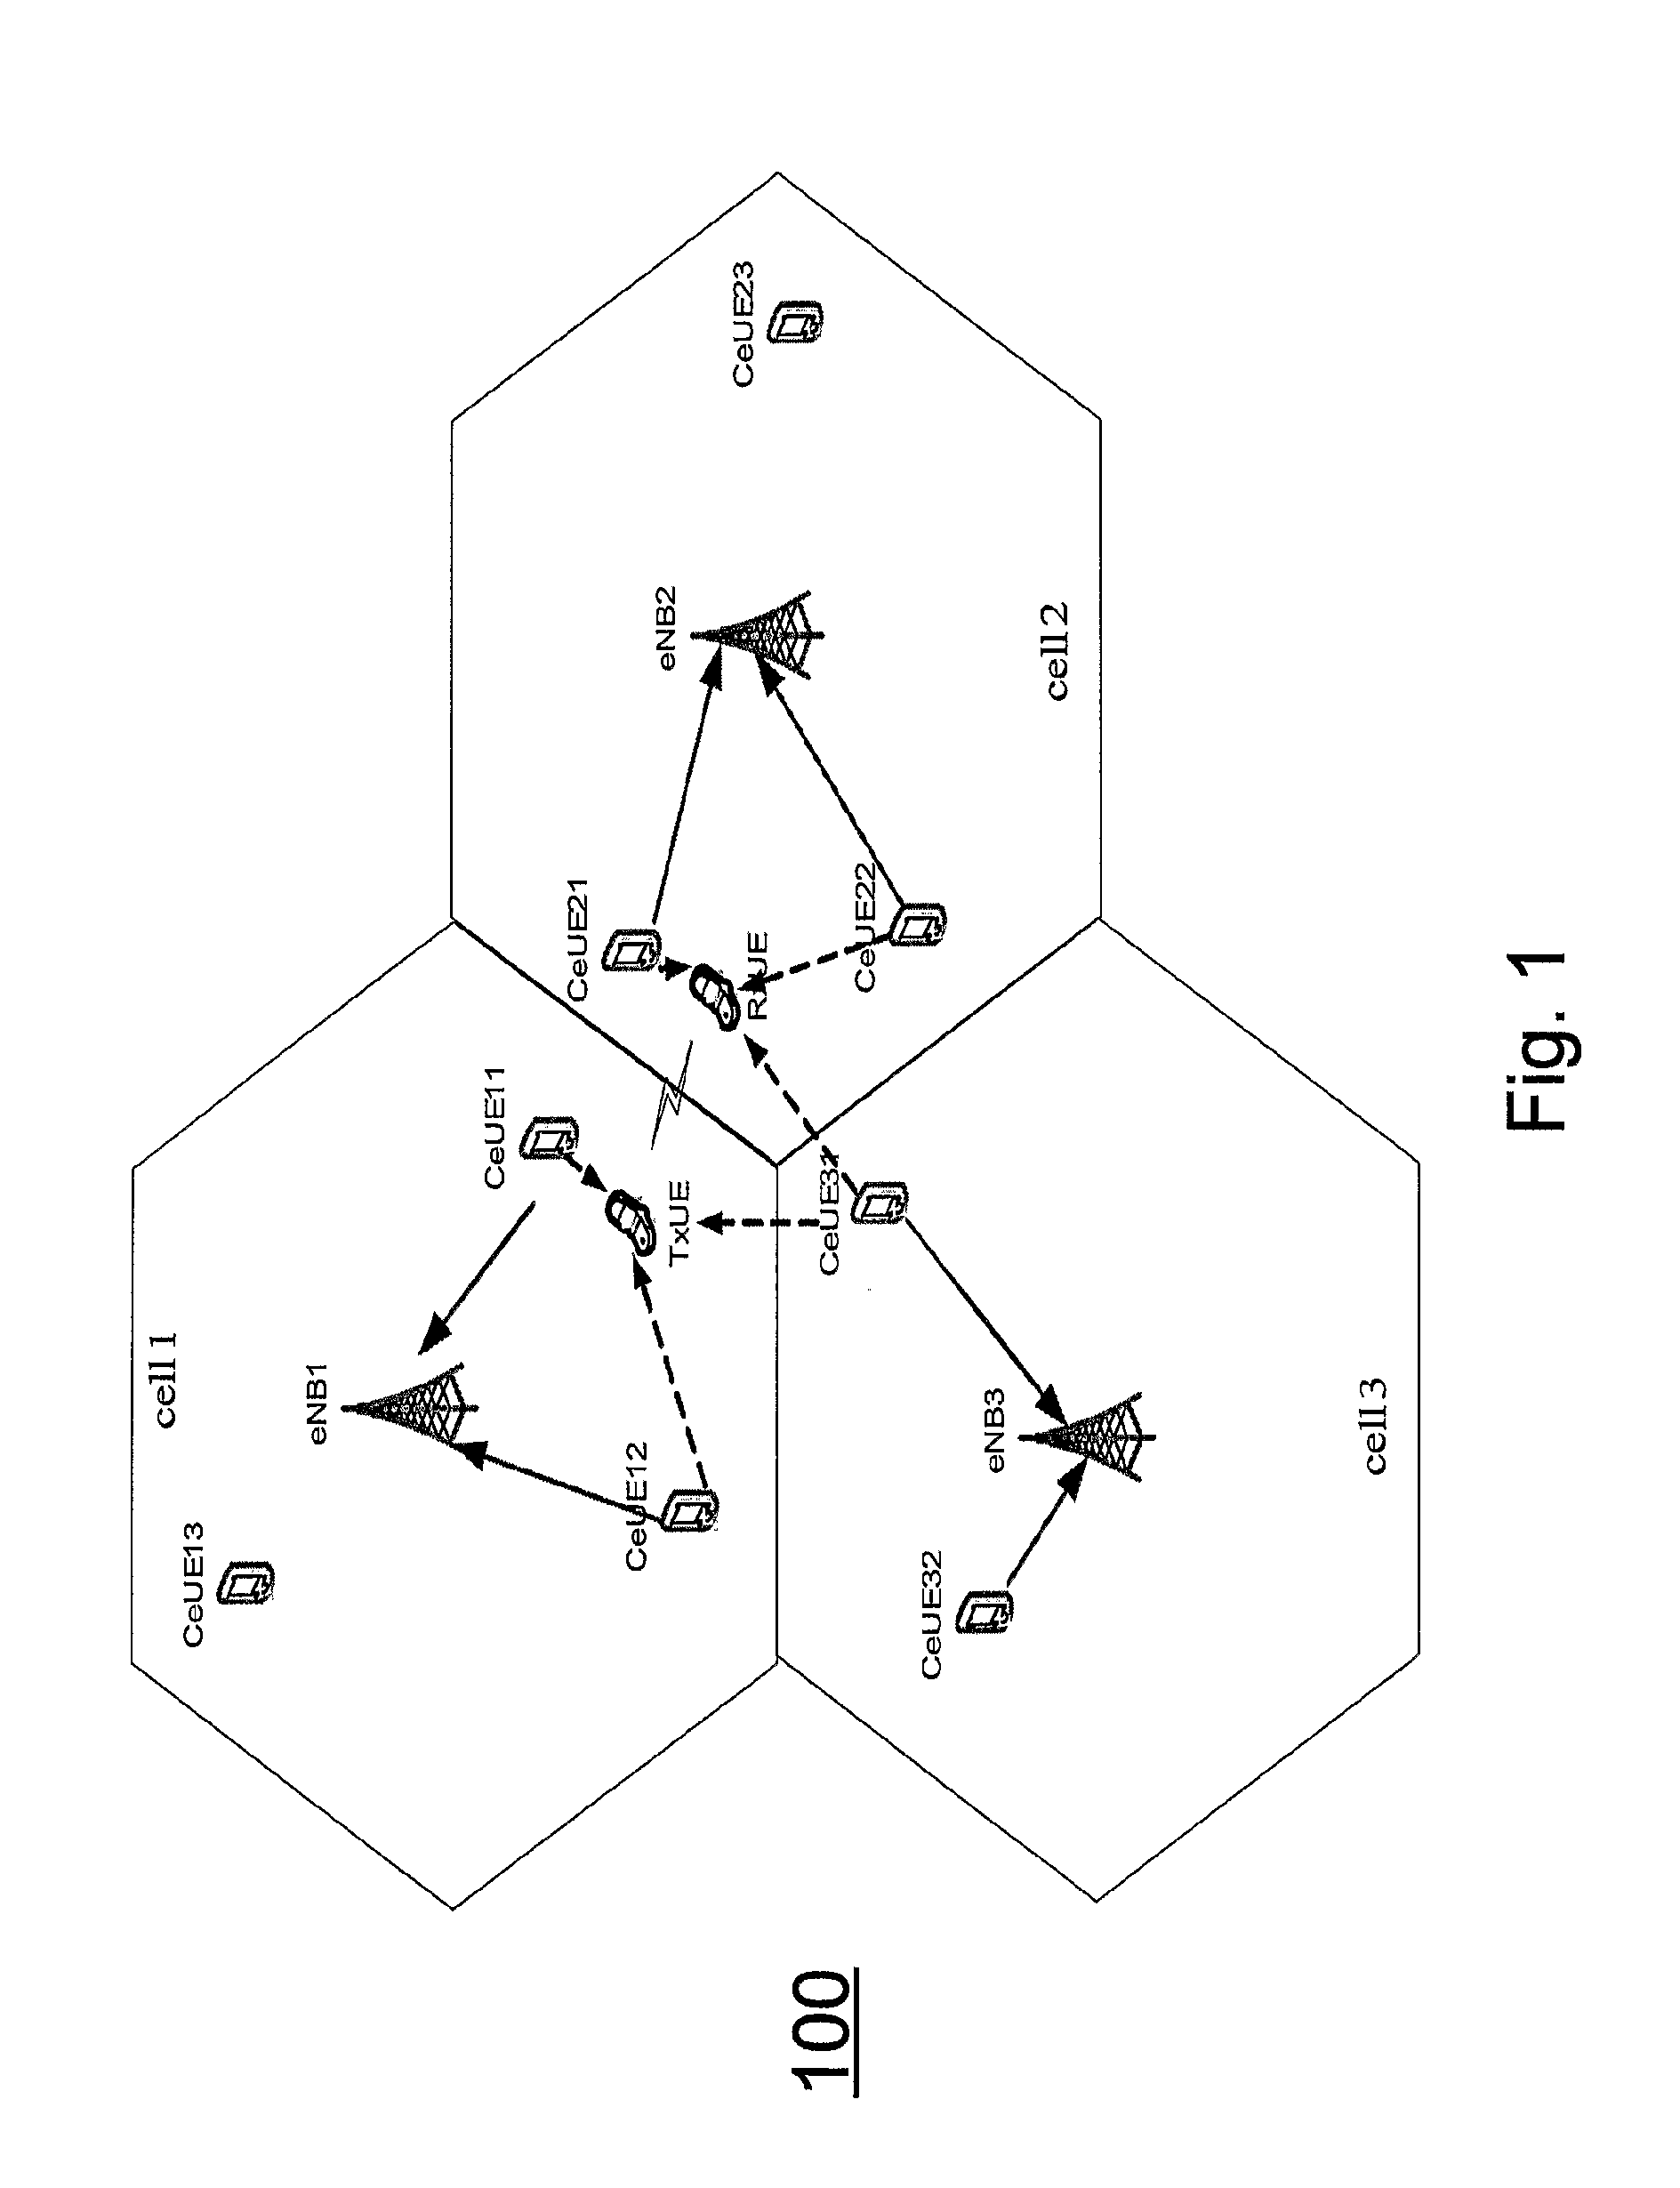 Cellular Control Sensing for Multicell Device-to-Device Interference Control